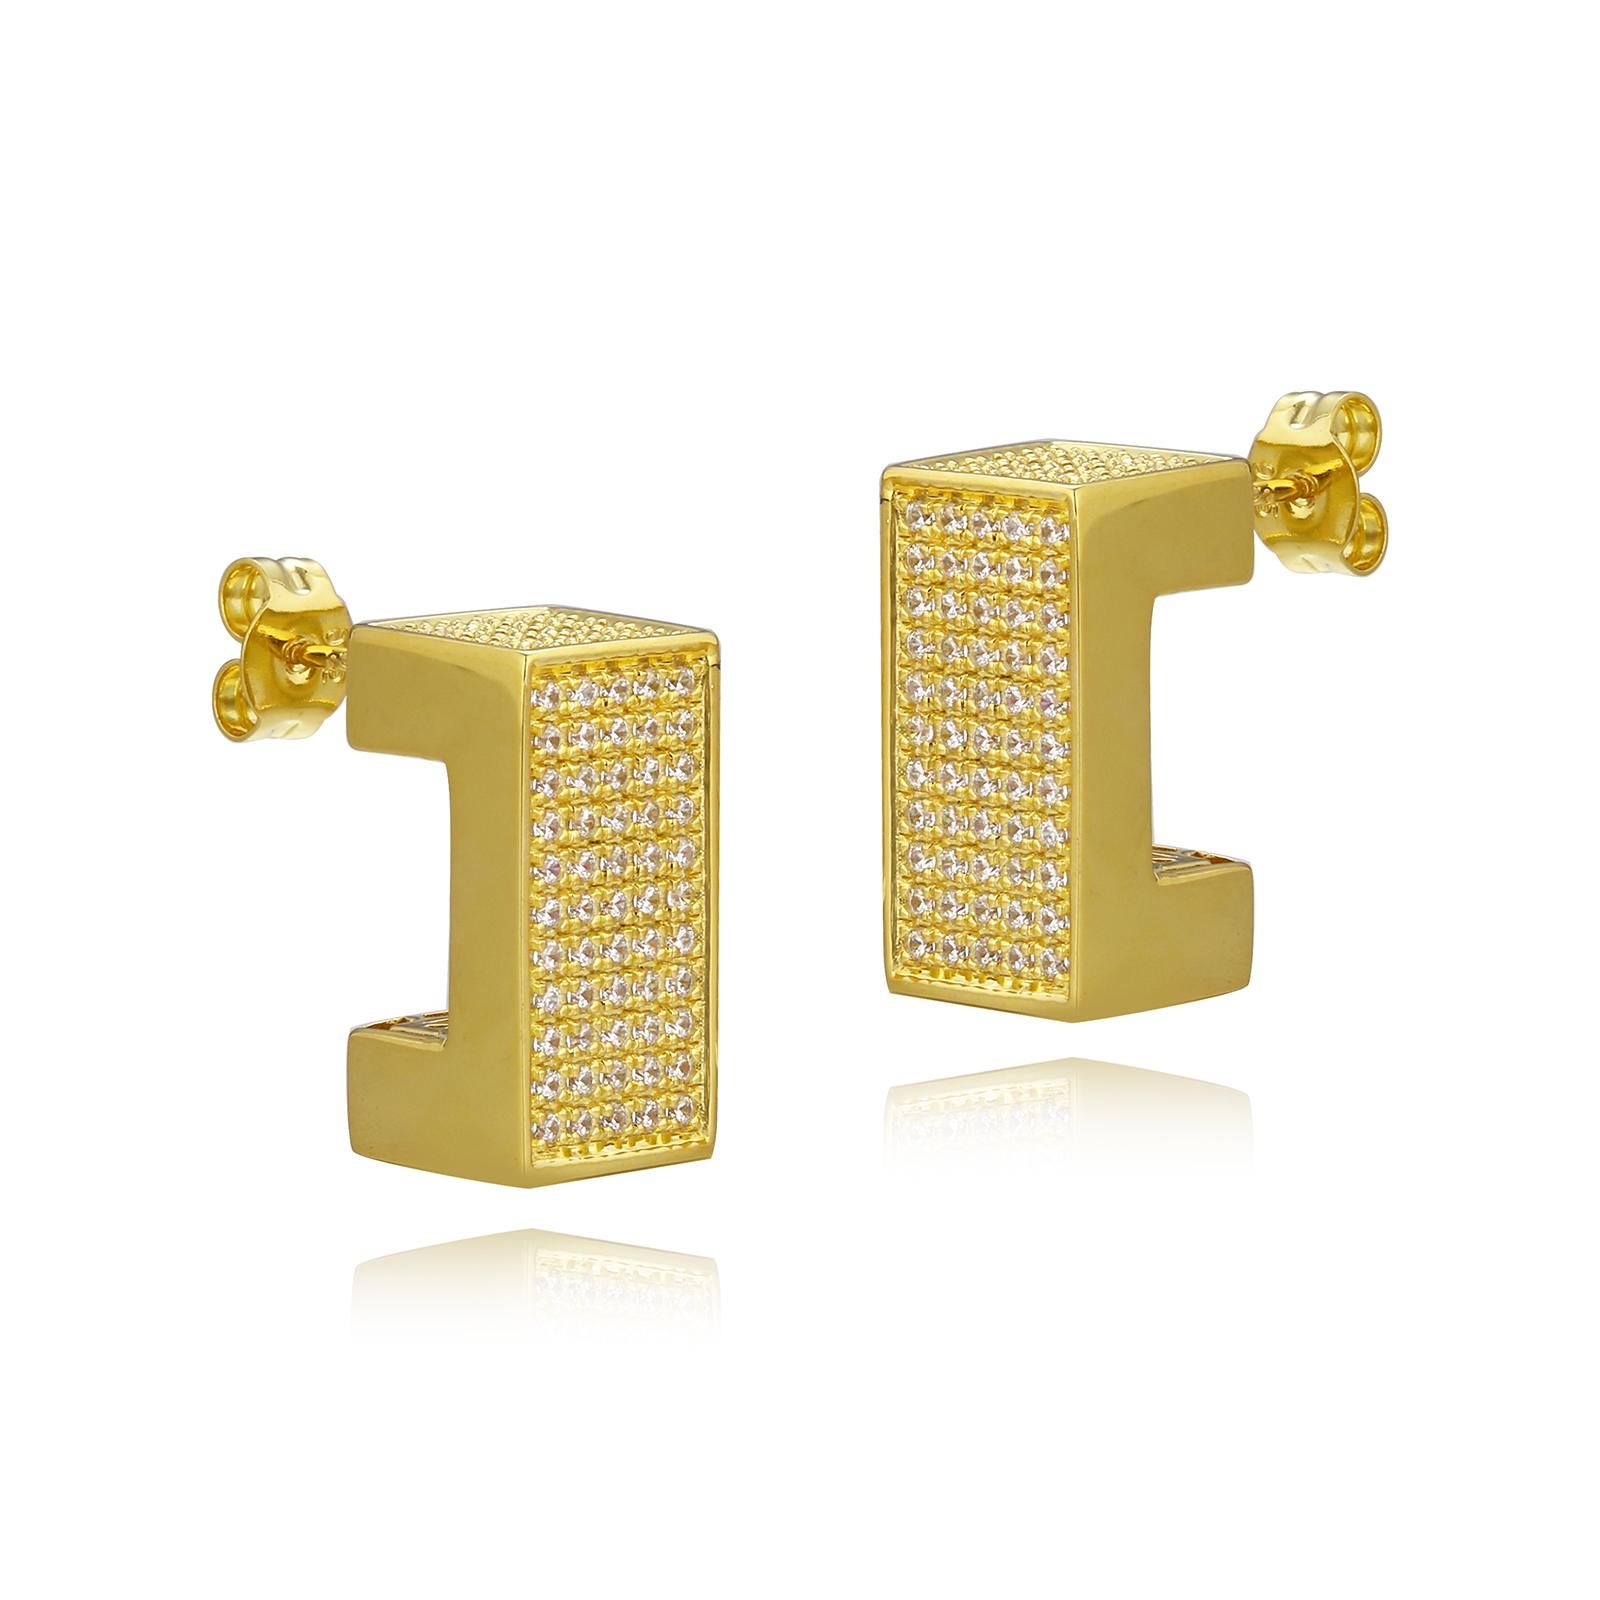 3D Square Pave Earrings In New Condition For Sale In New York, NY